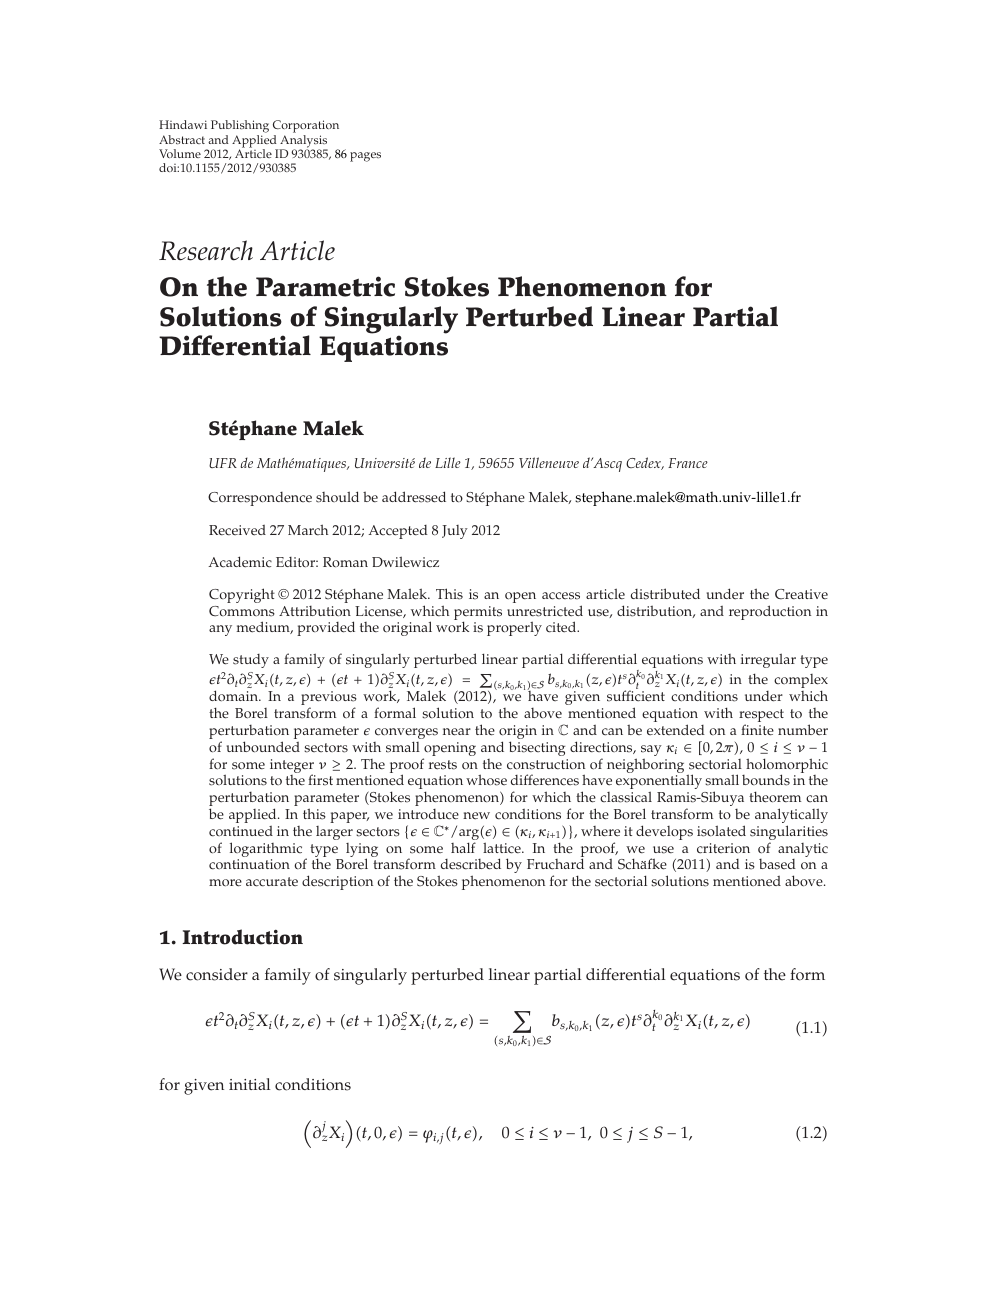 On The Parametric Stokes Phenomenon For Solutions Of Singularly Perturbed Linear Partial Differential Equations Topic Of Research Paper In Mathematics Download Scholarly Article Pdf And Read For Free On Cyberleninka Open